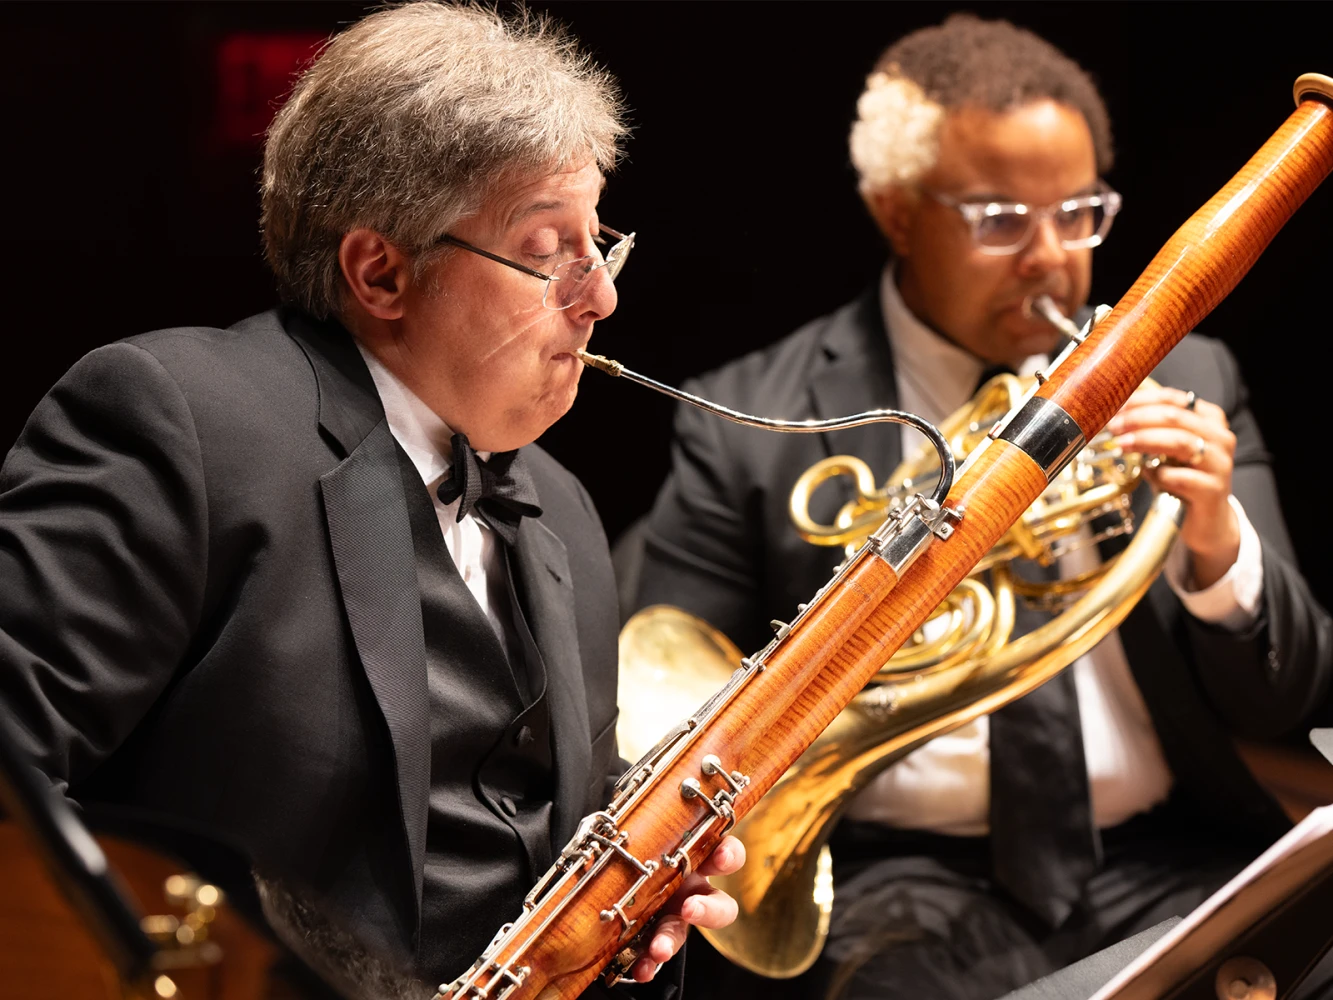 The Chamber Music Society of Lincoln Center: The Soldier's Tale: What to expect - 2